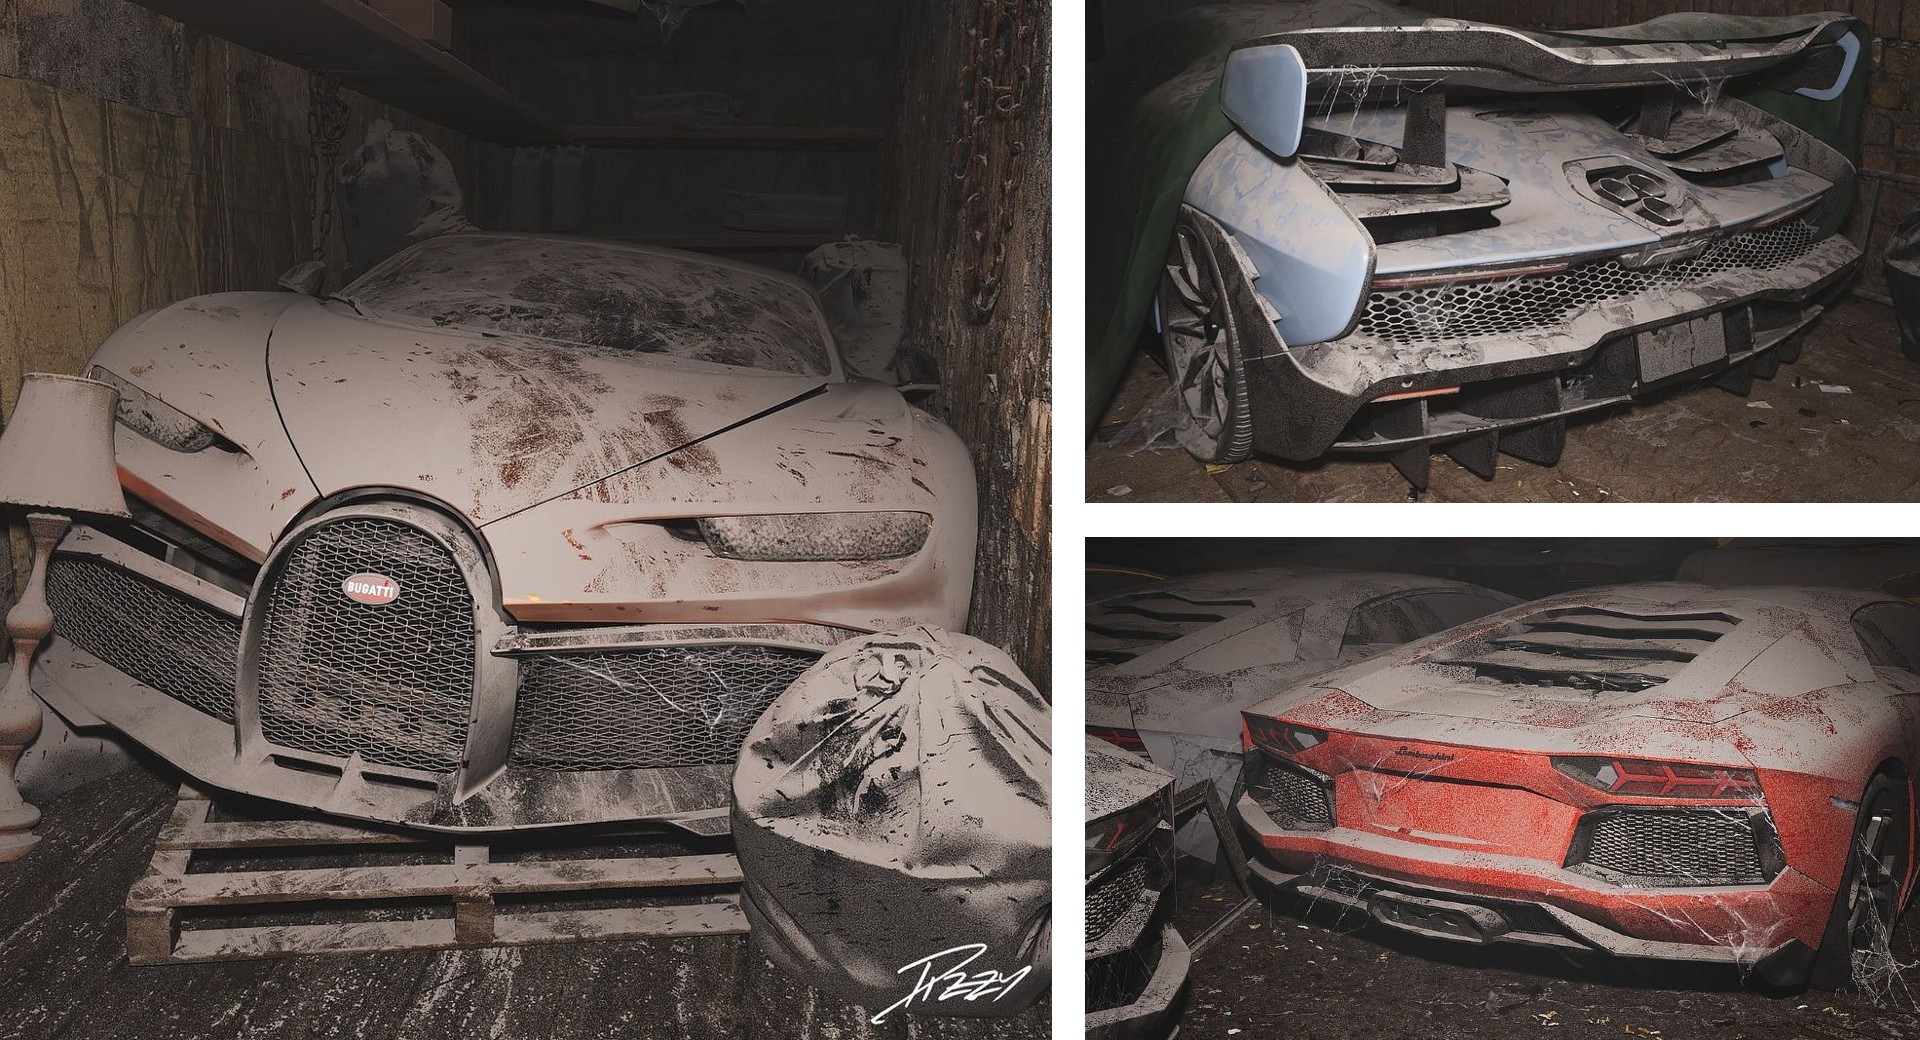 Returning Items Left in Abandoned Vehicles